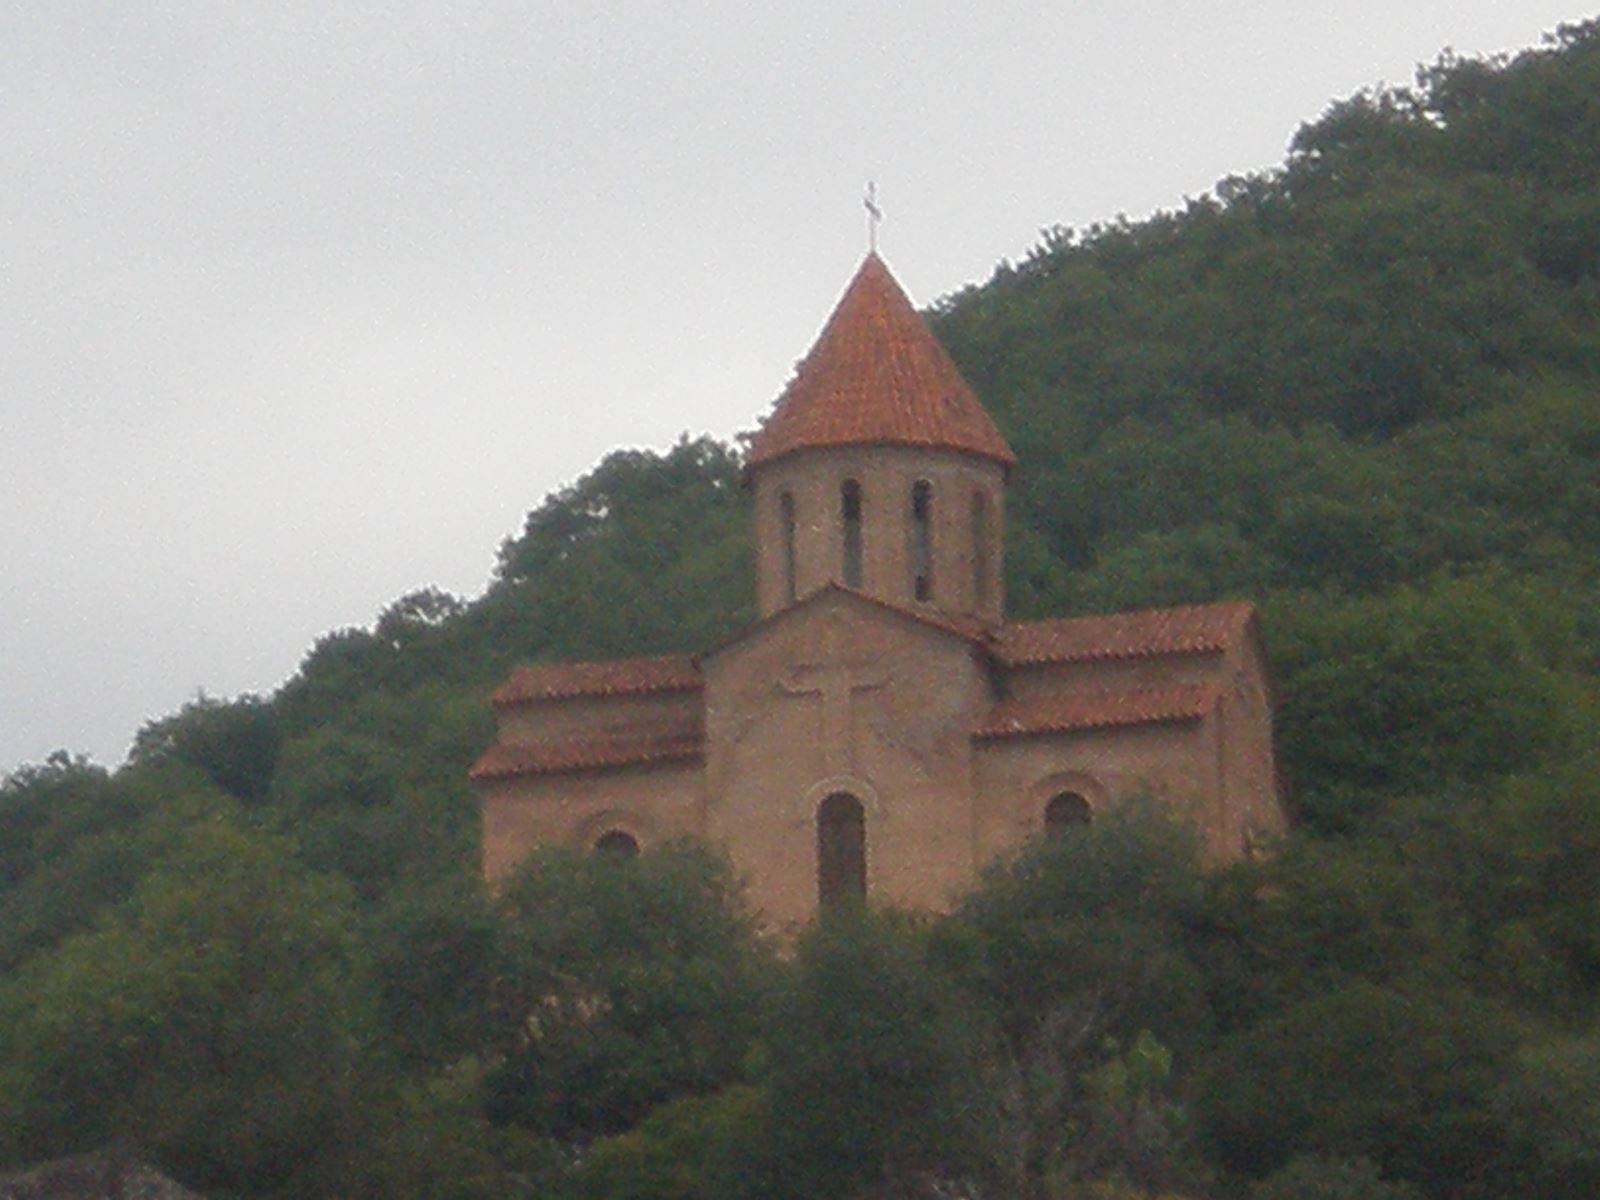 Albanian church perched above the dilapidated A20 road 3km south of town